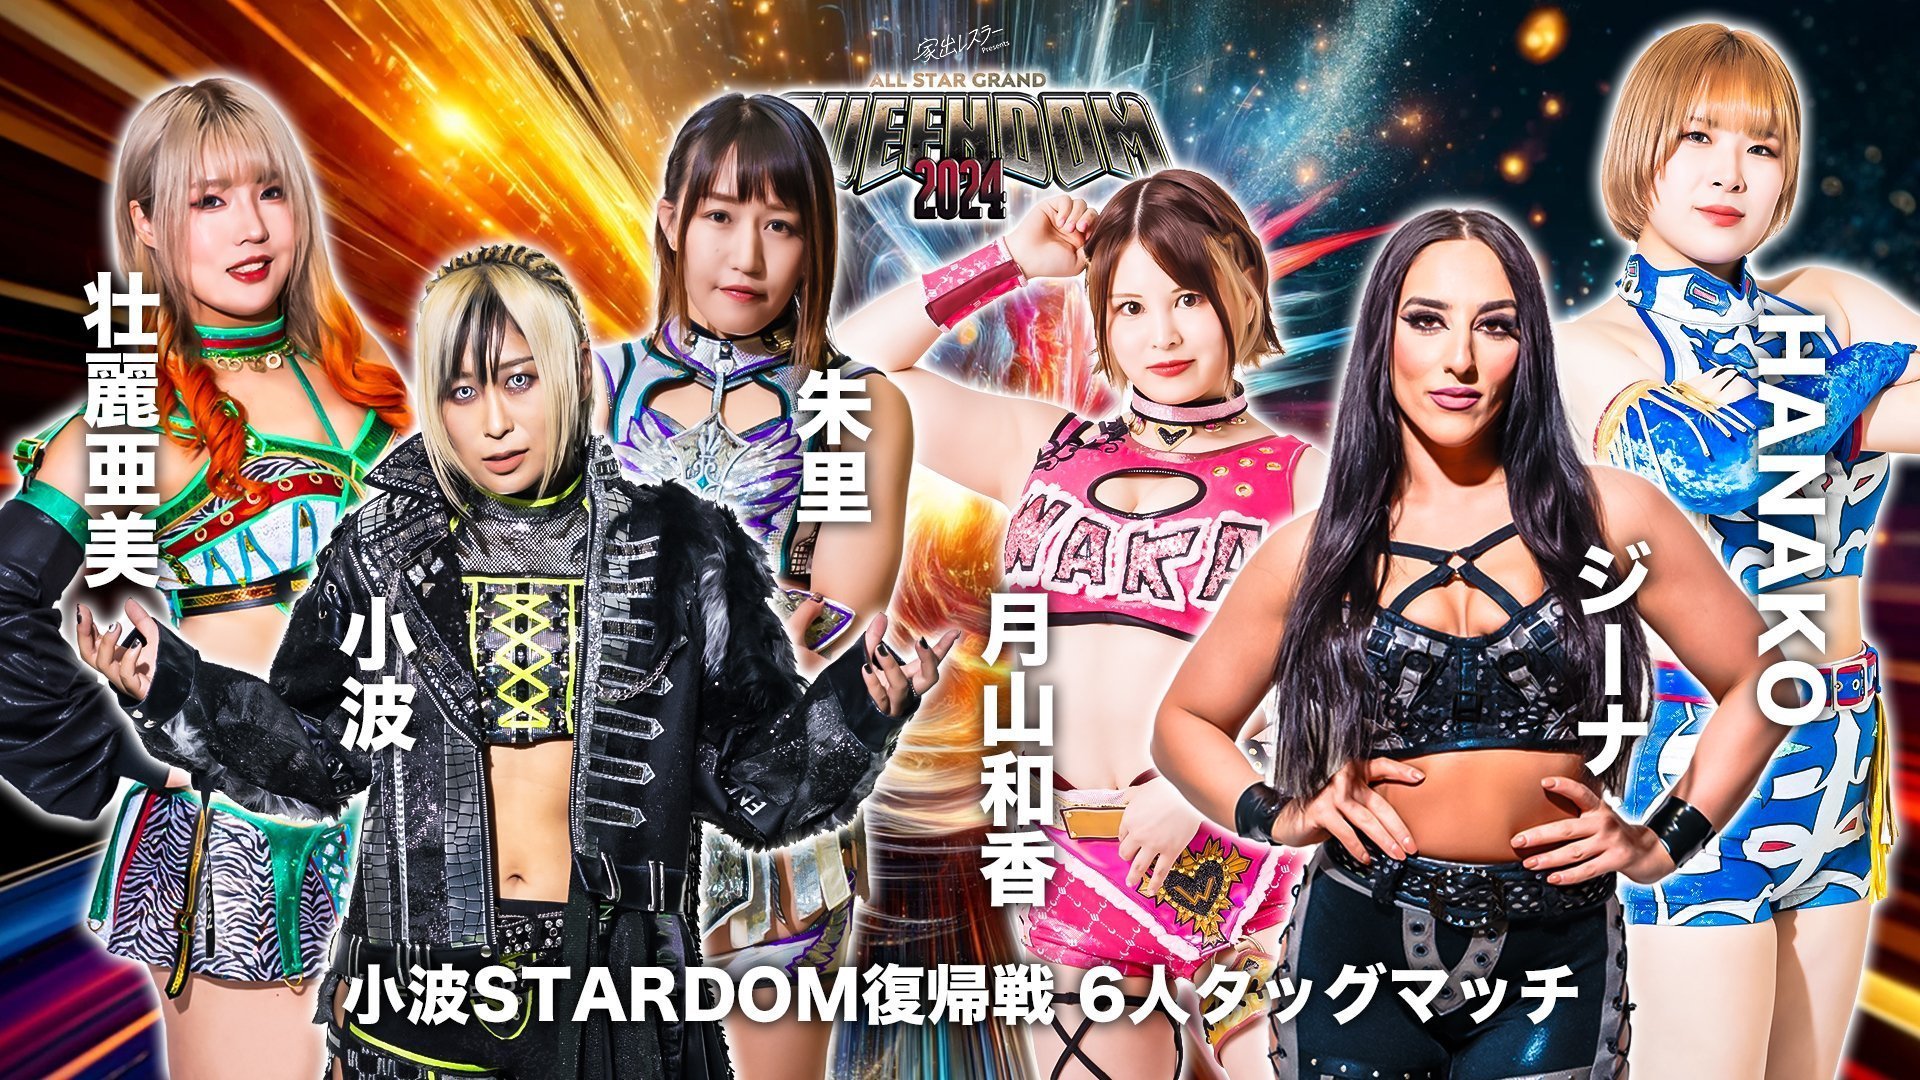 “STARDOM All-Star Grand Queendom 2024: Unveiling the Thrilling Results of the Highly-Anticipated Event on April 27th”